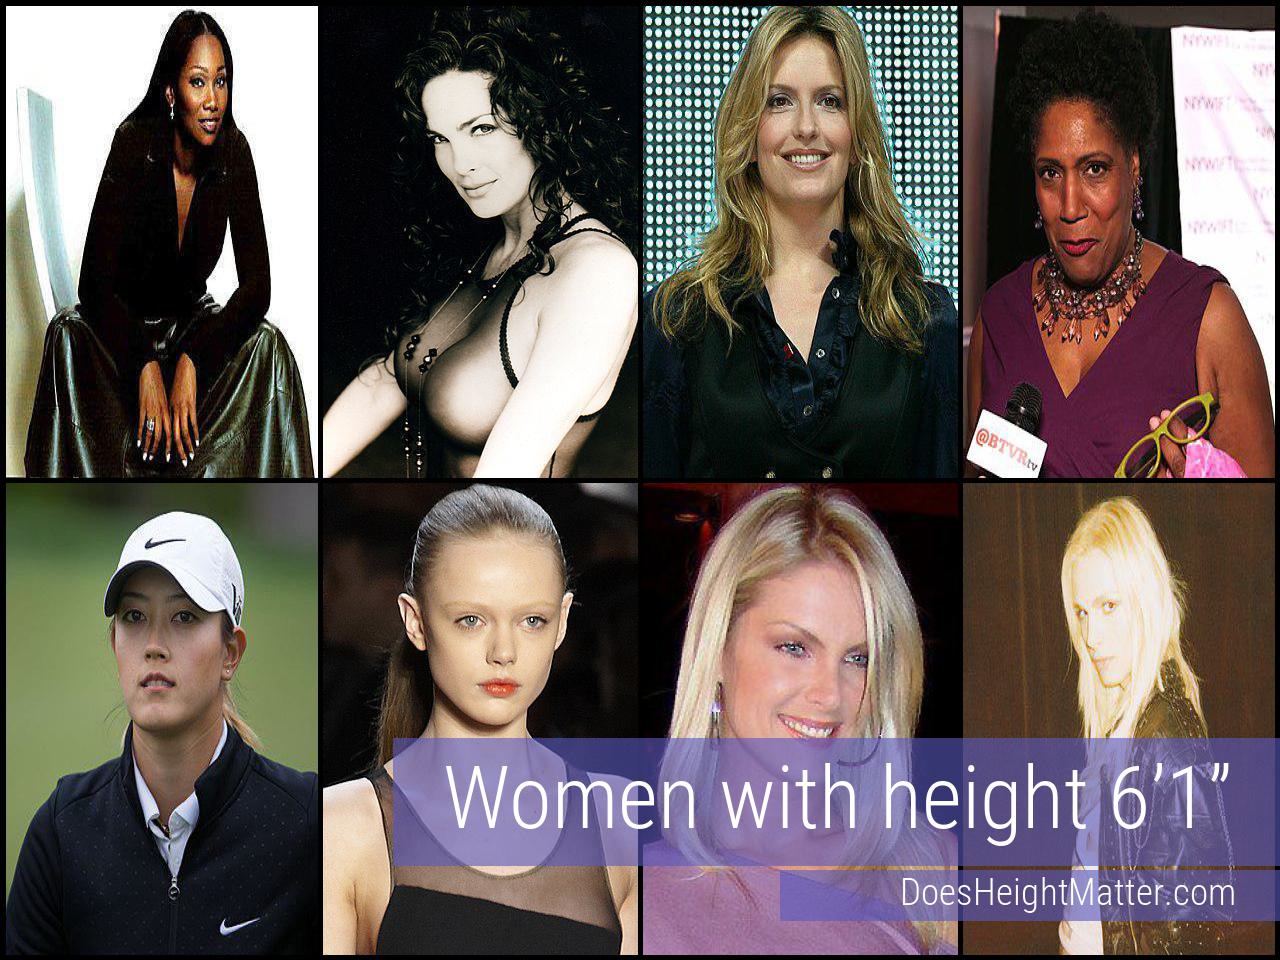 Female celebrities who are 6'1